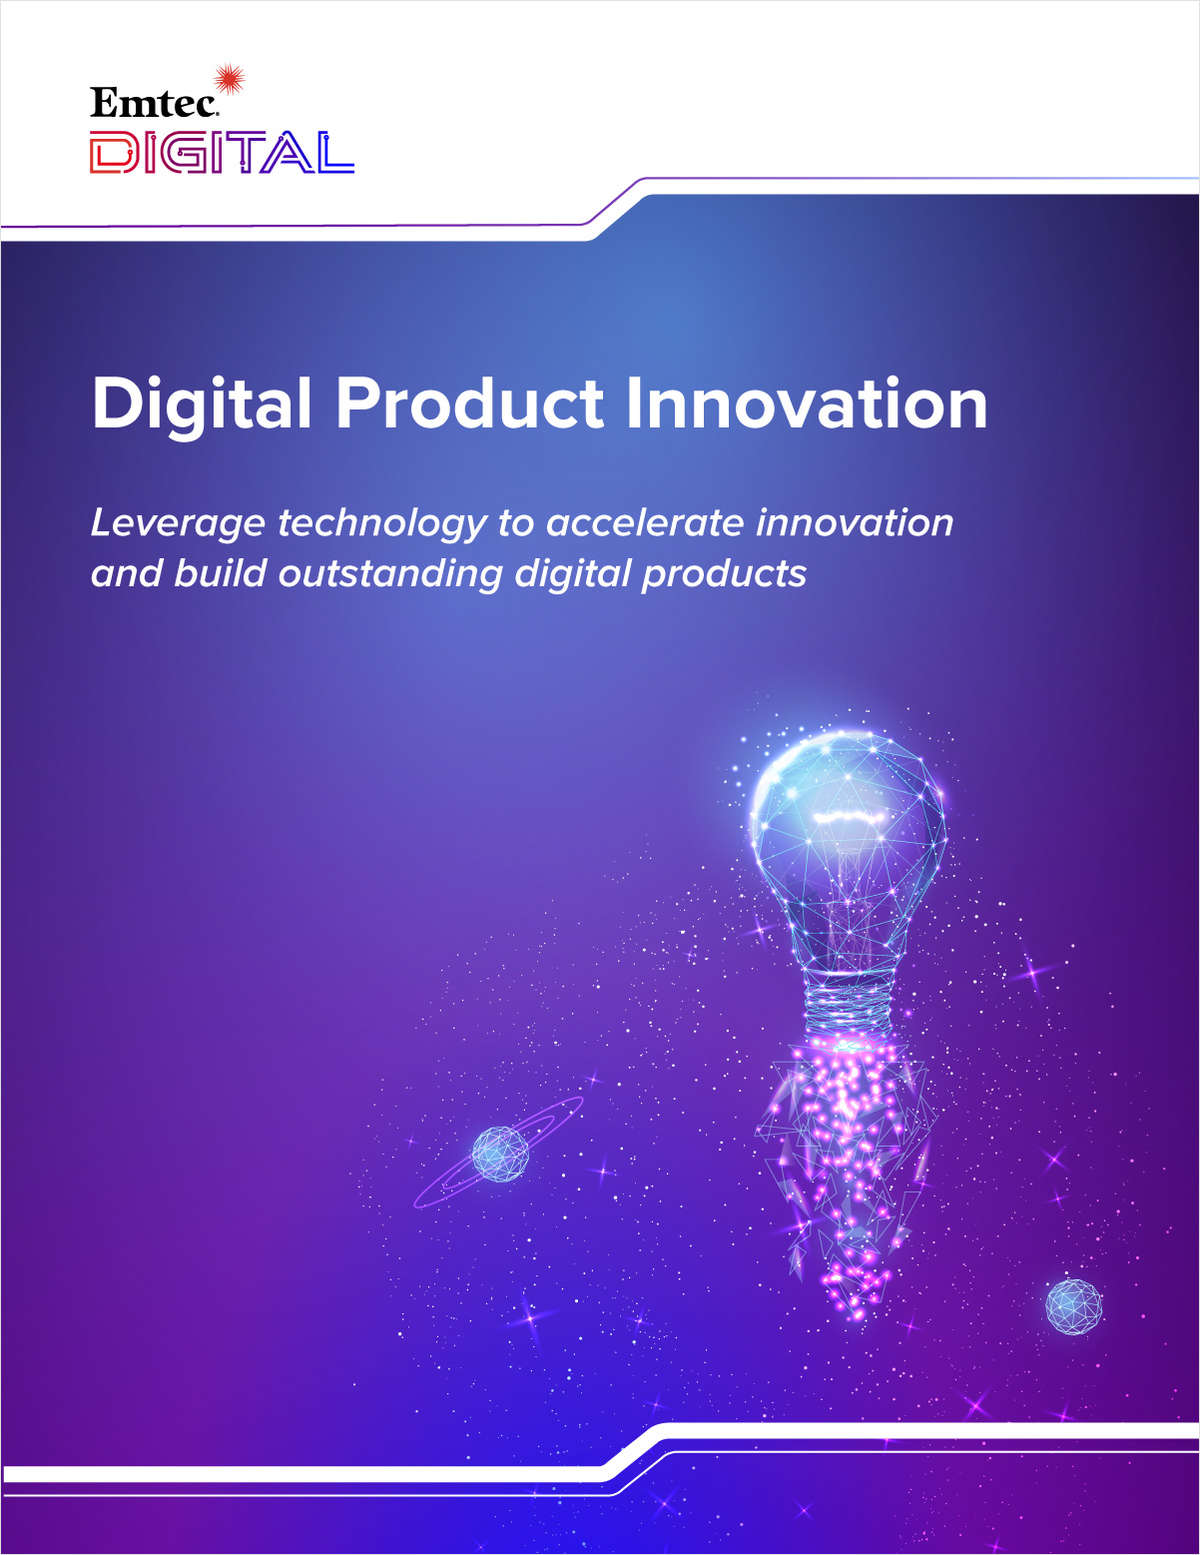 Digital Product Innovation for Superior Omnichannel Experiences